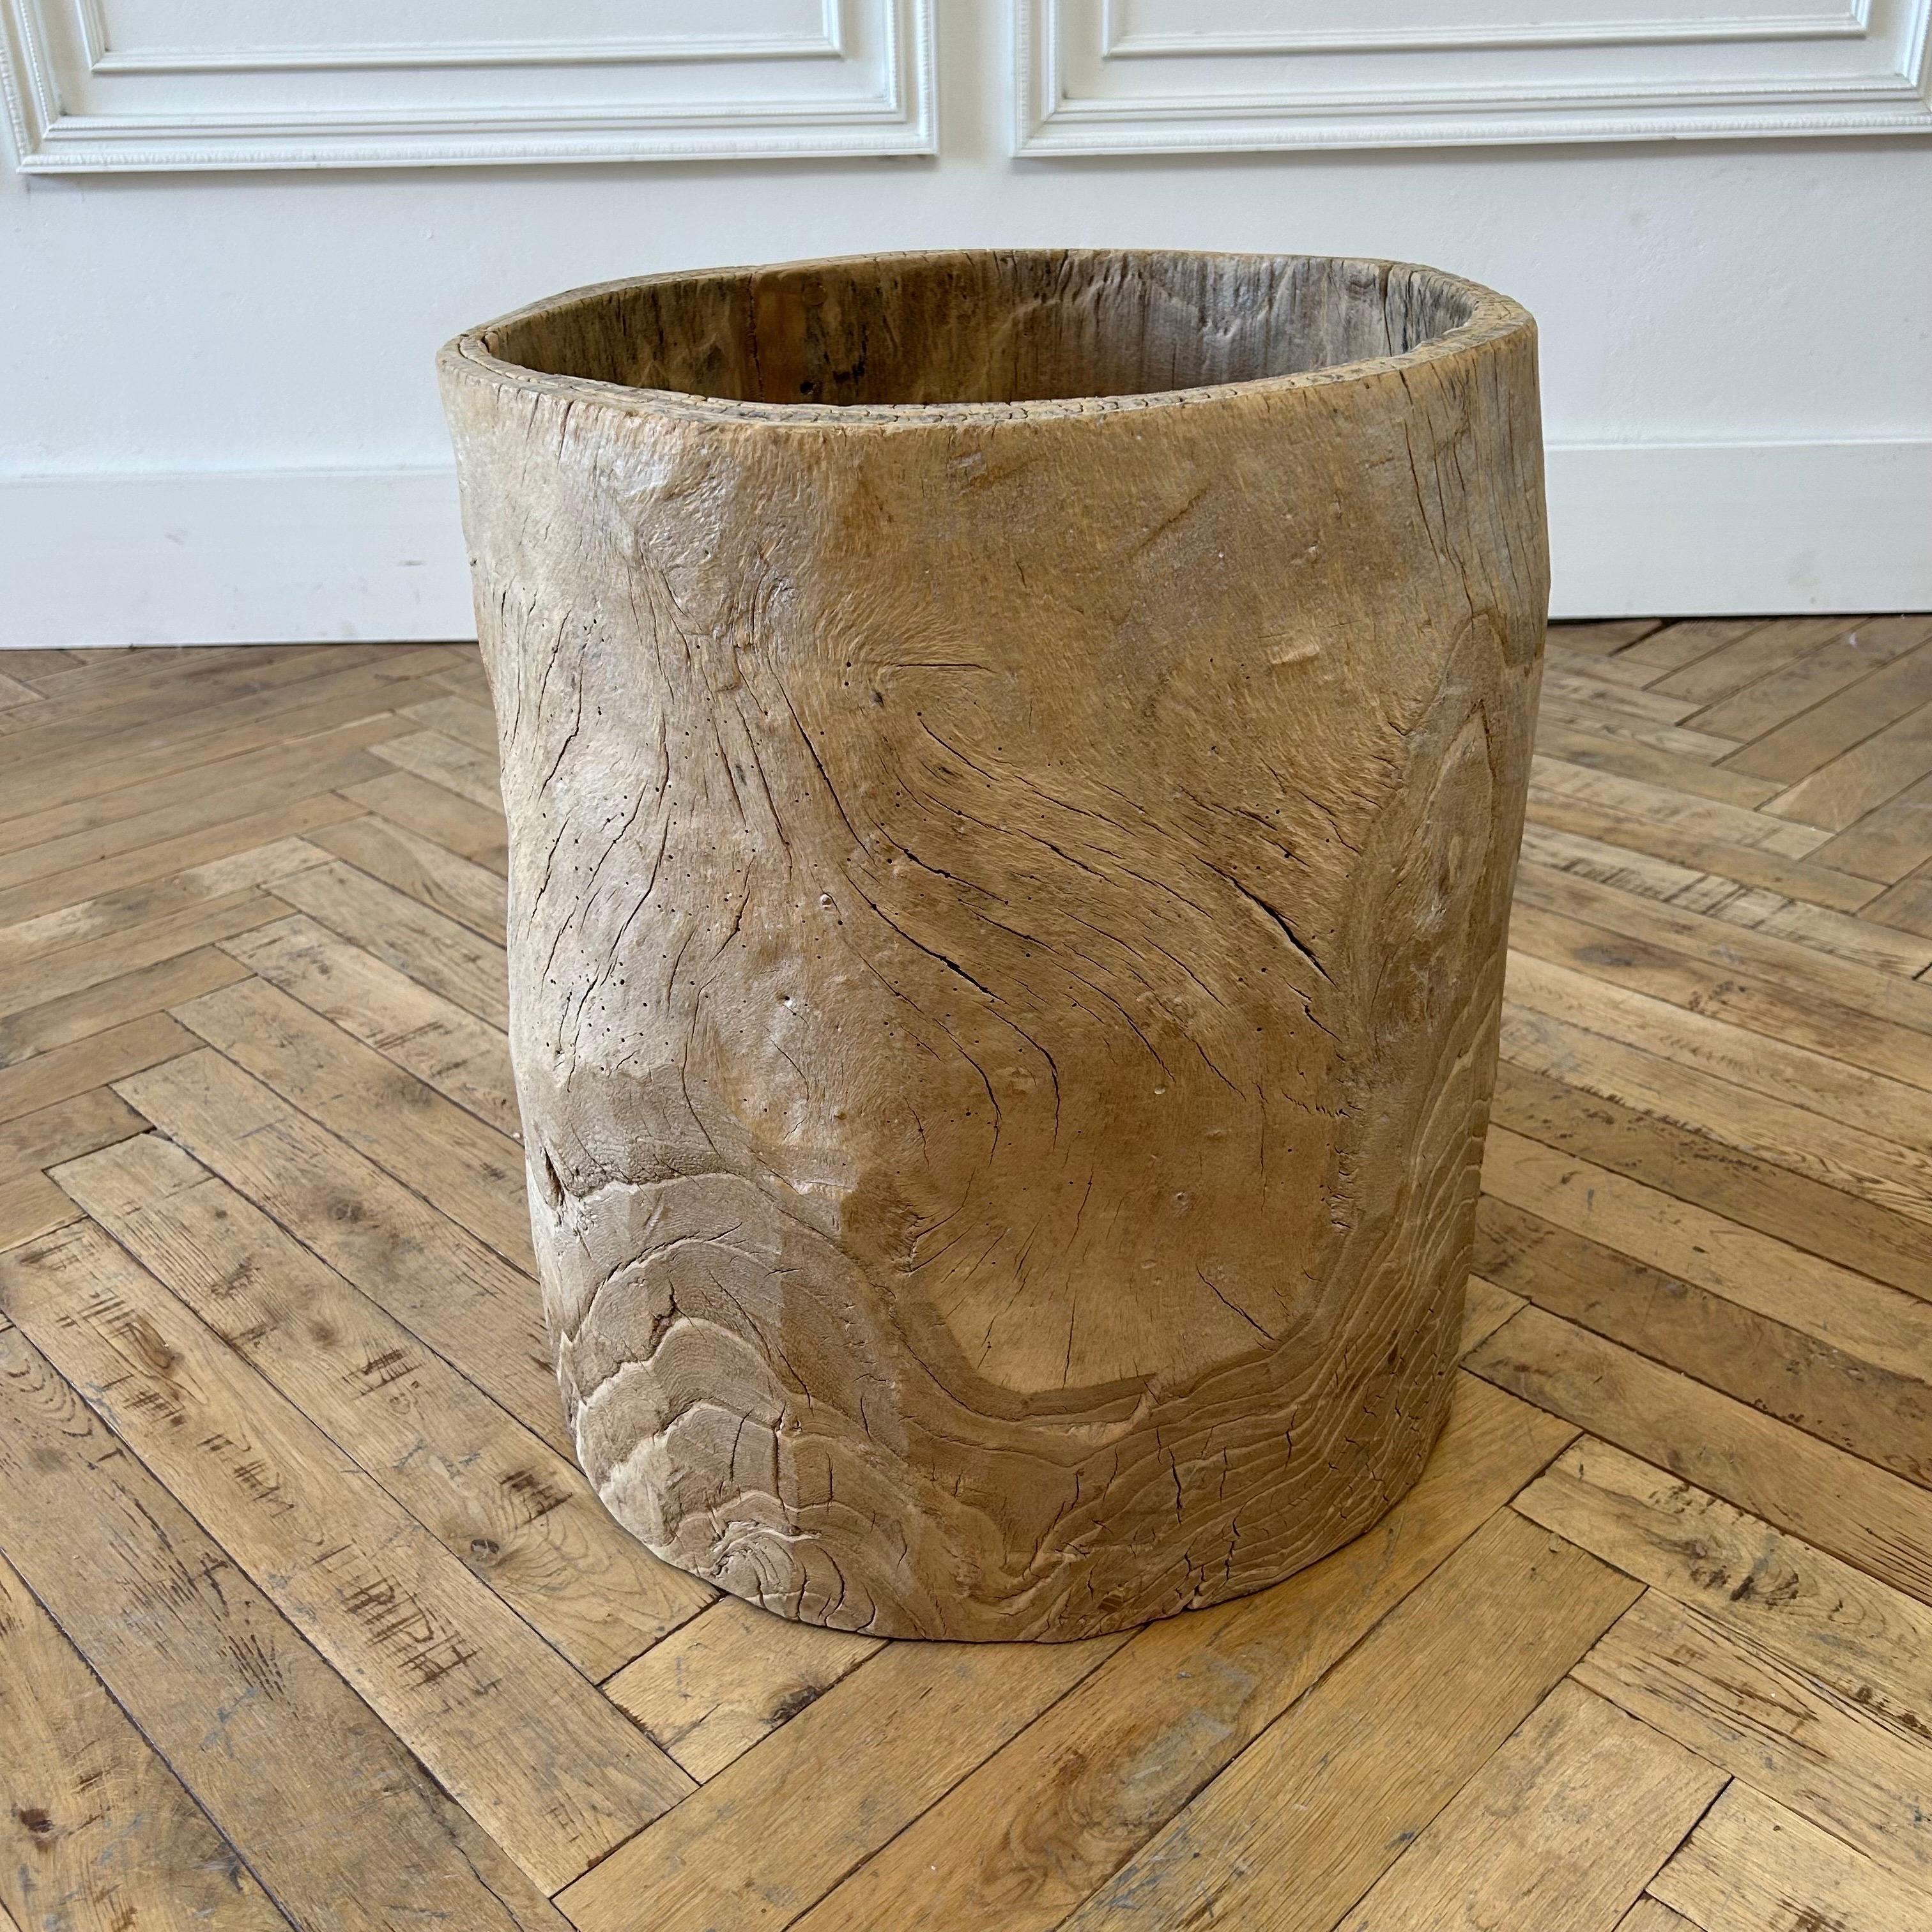 Large Carved Out Stump Decorative Planter 1